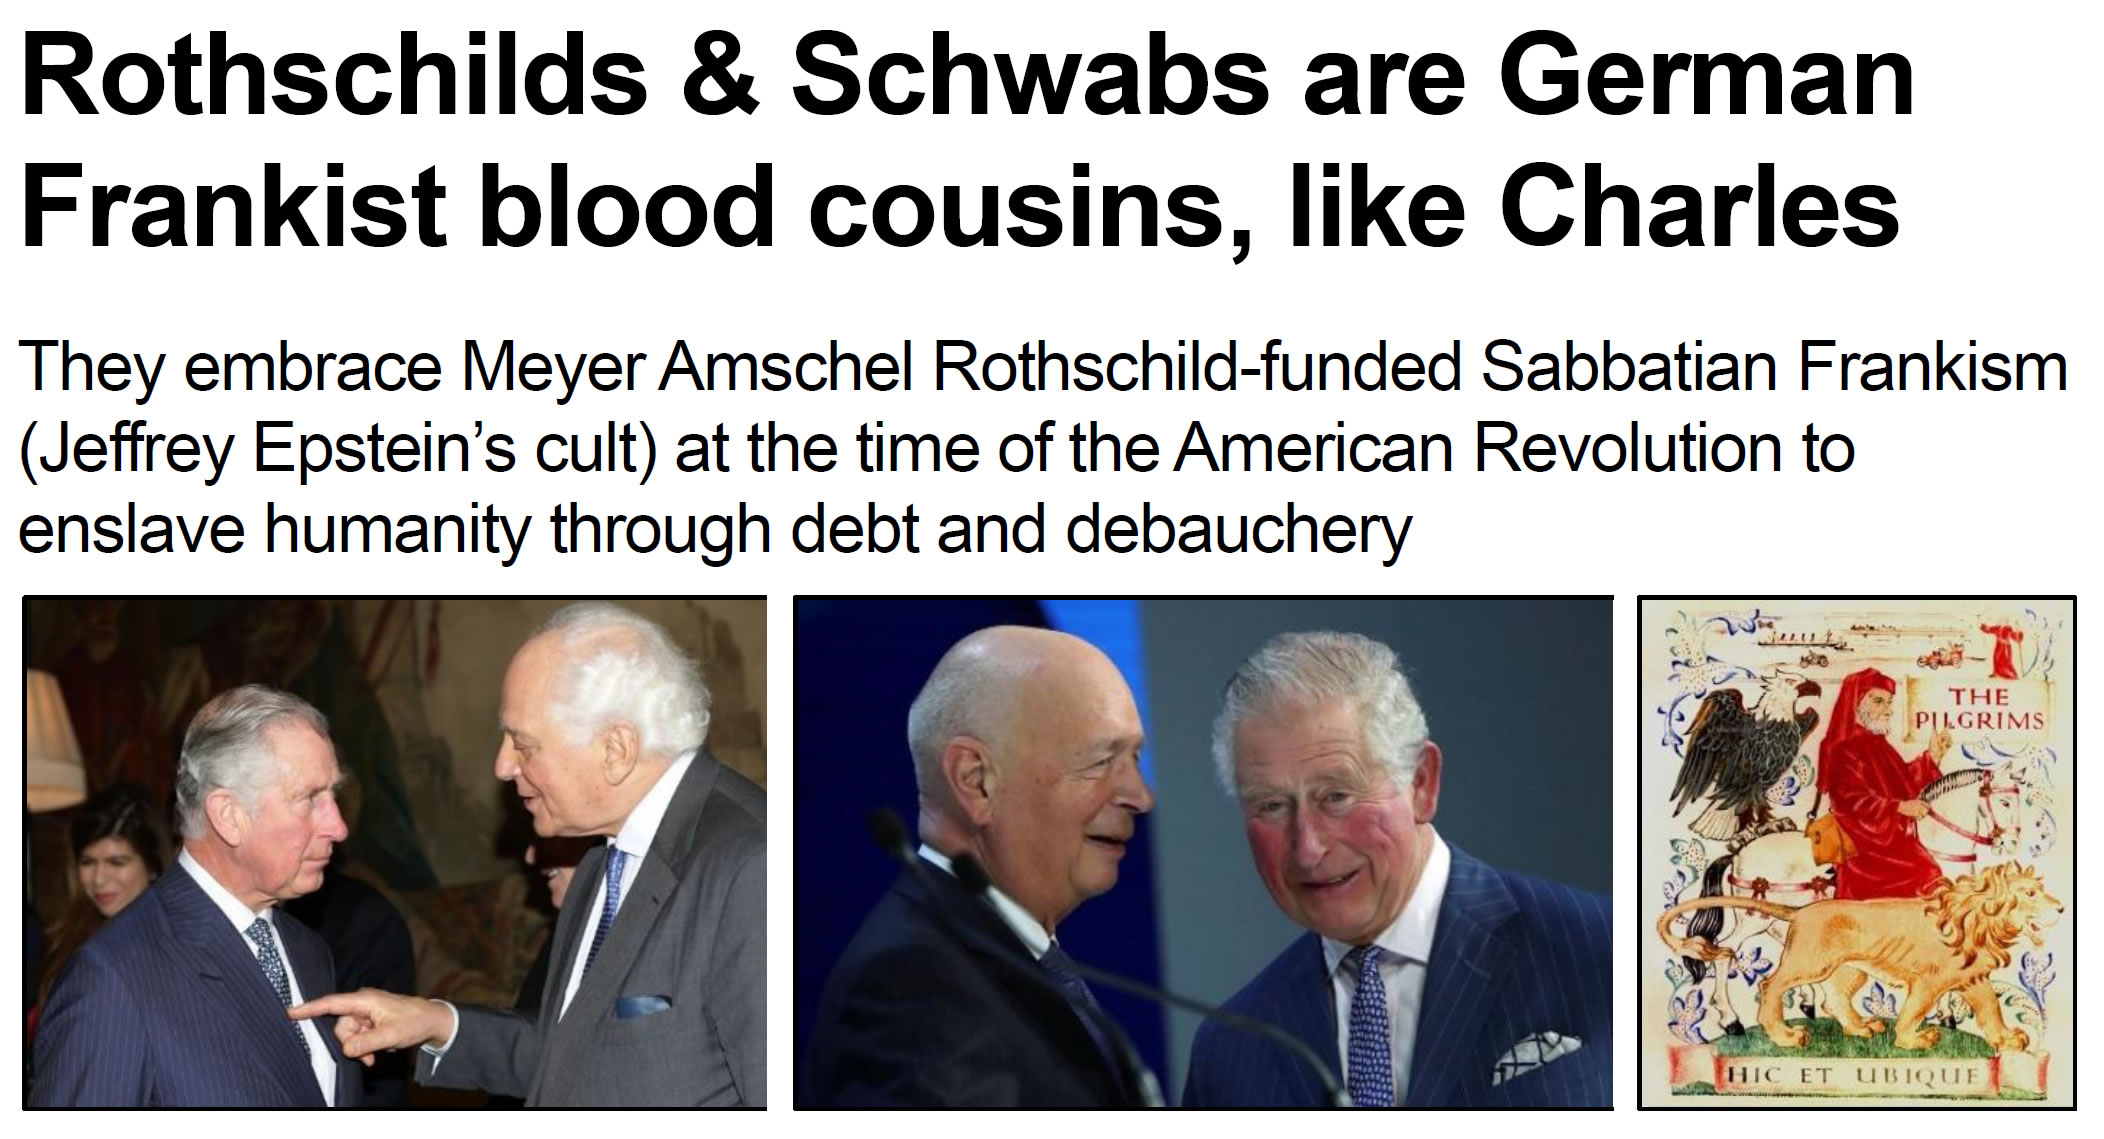 Anonymous Patriots. (Feb. 21, 2022). Rothschilds & Schwabs are German Frankist blood cousins, like Charles. Patriots for a Human Future under God.